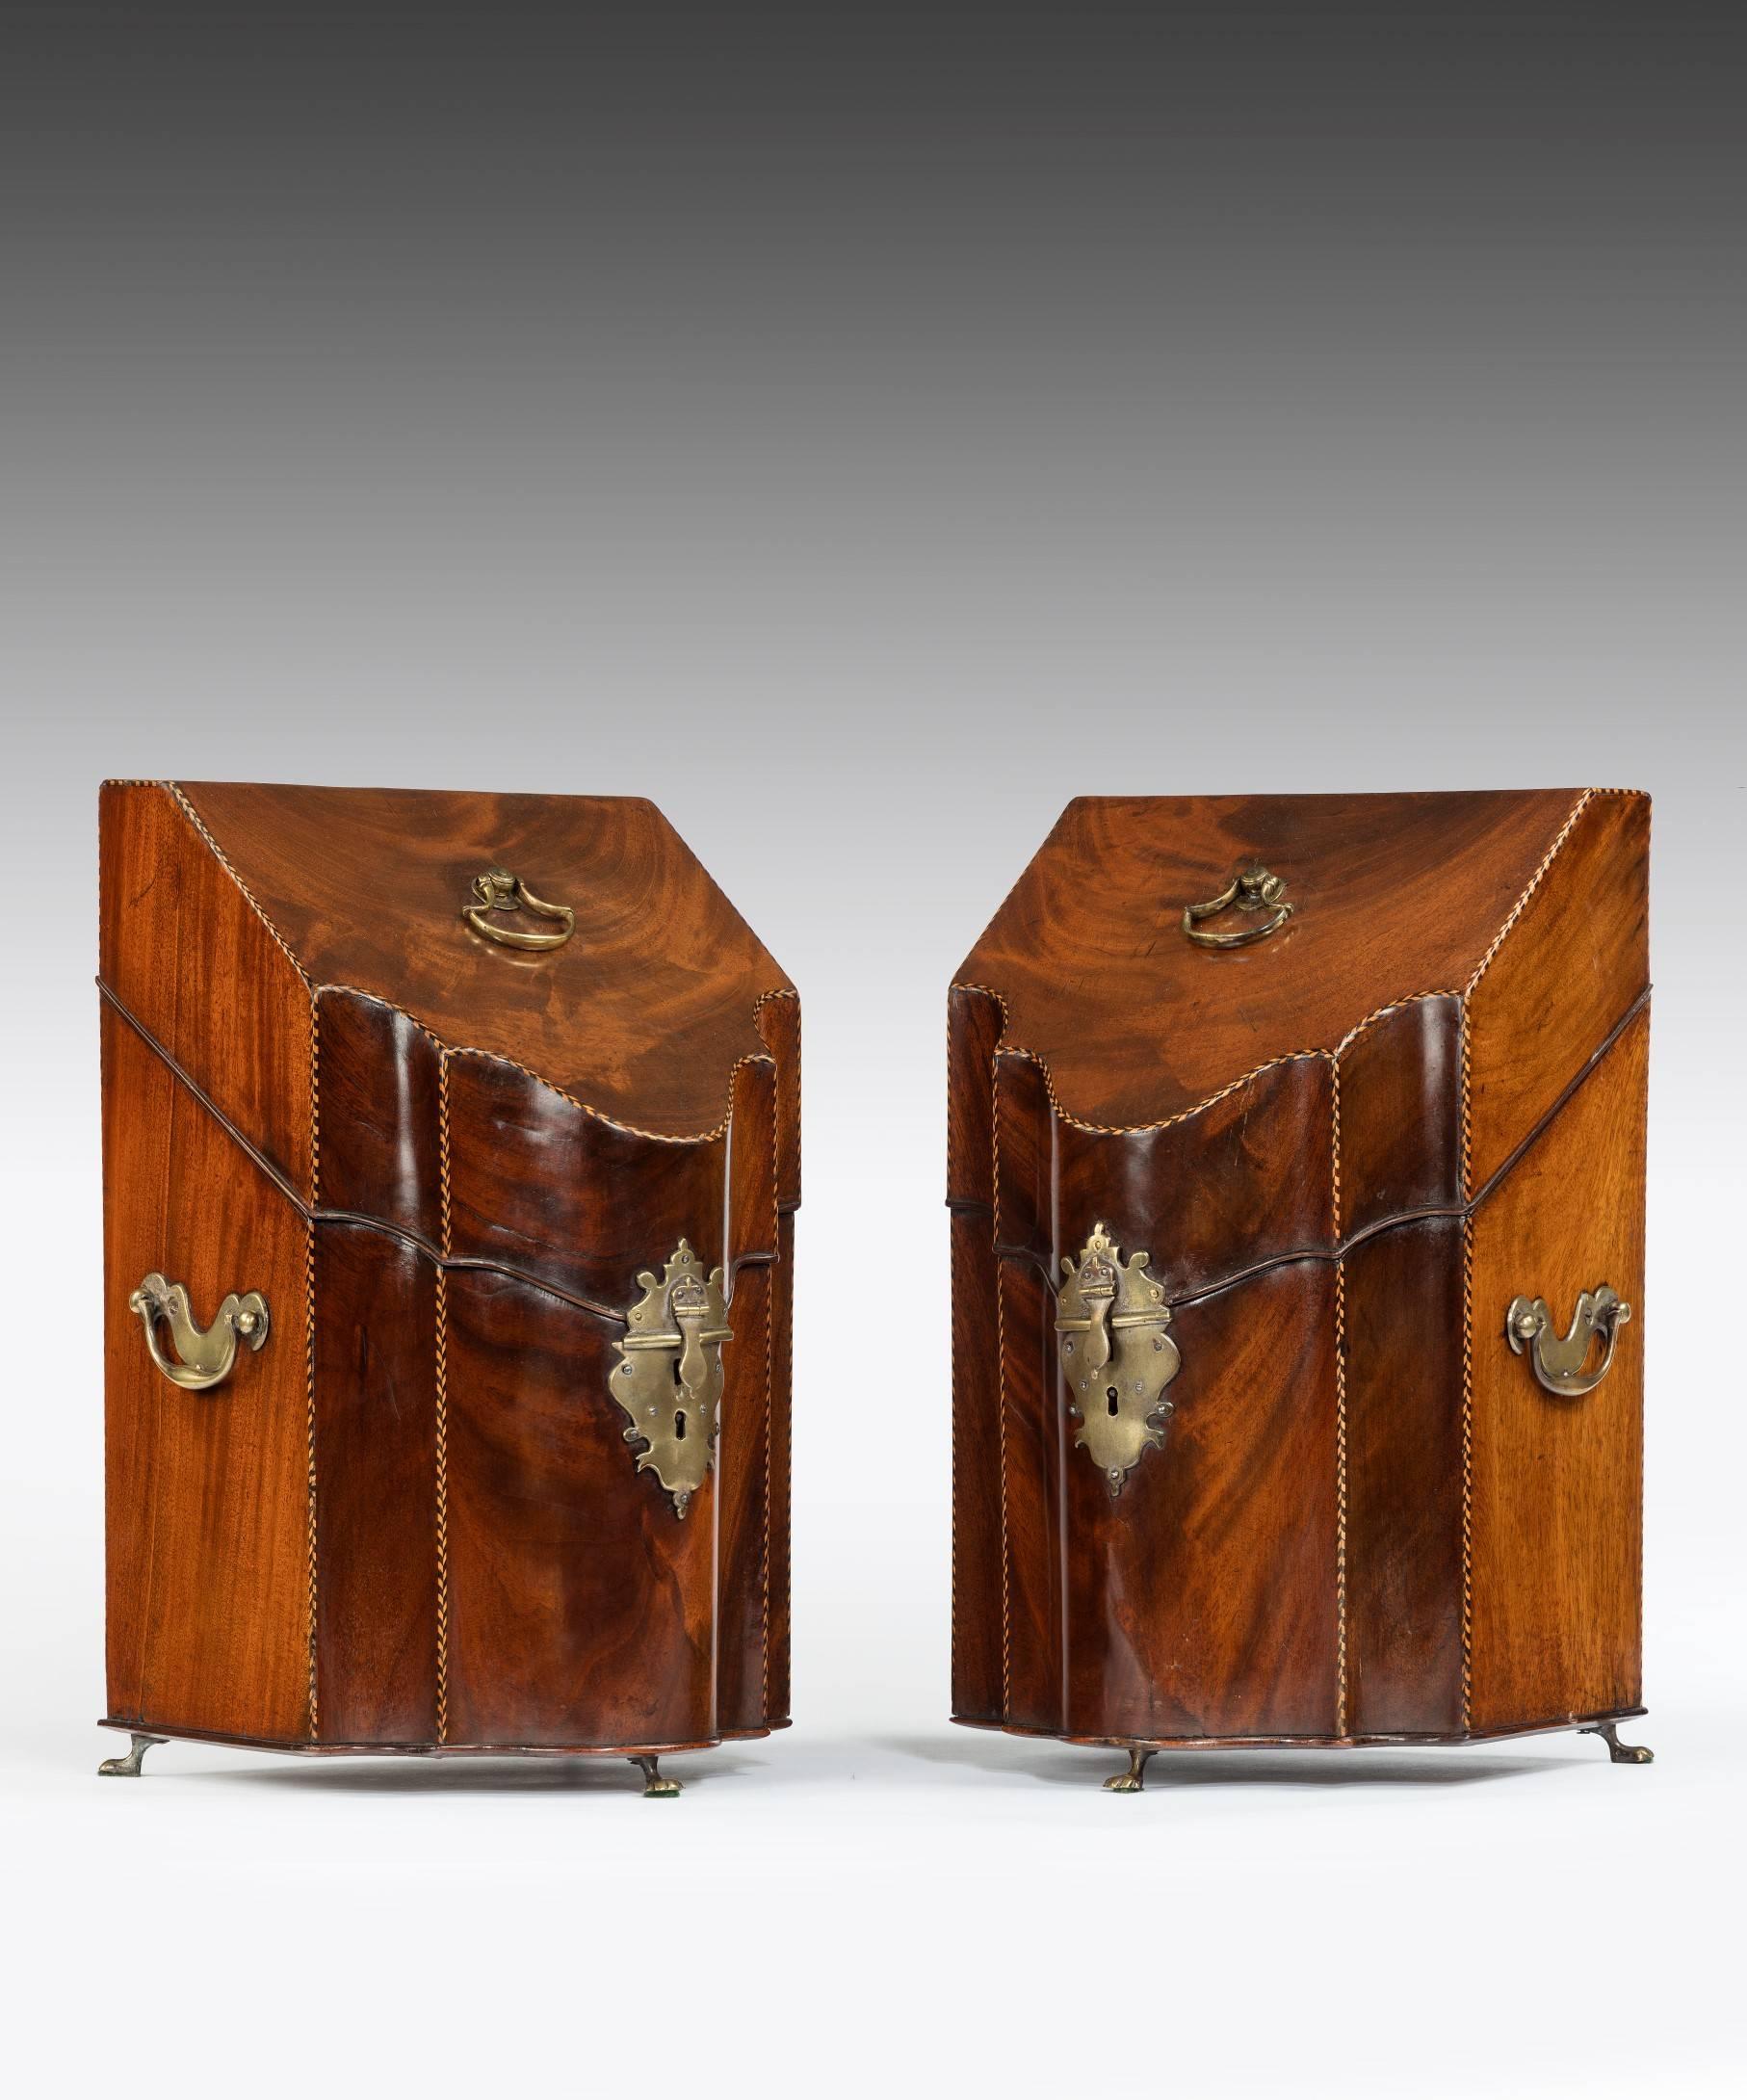 A pair of George III Sheraton period mahogany knife boxes; the knife box's lift-up lid is veneered in flame Cuban mahogany with barber's pole stringing and retains the original axe-head handle, the lid opens to reveal a fully fitted interior. The